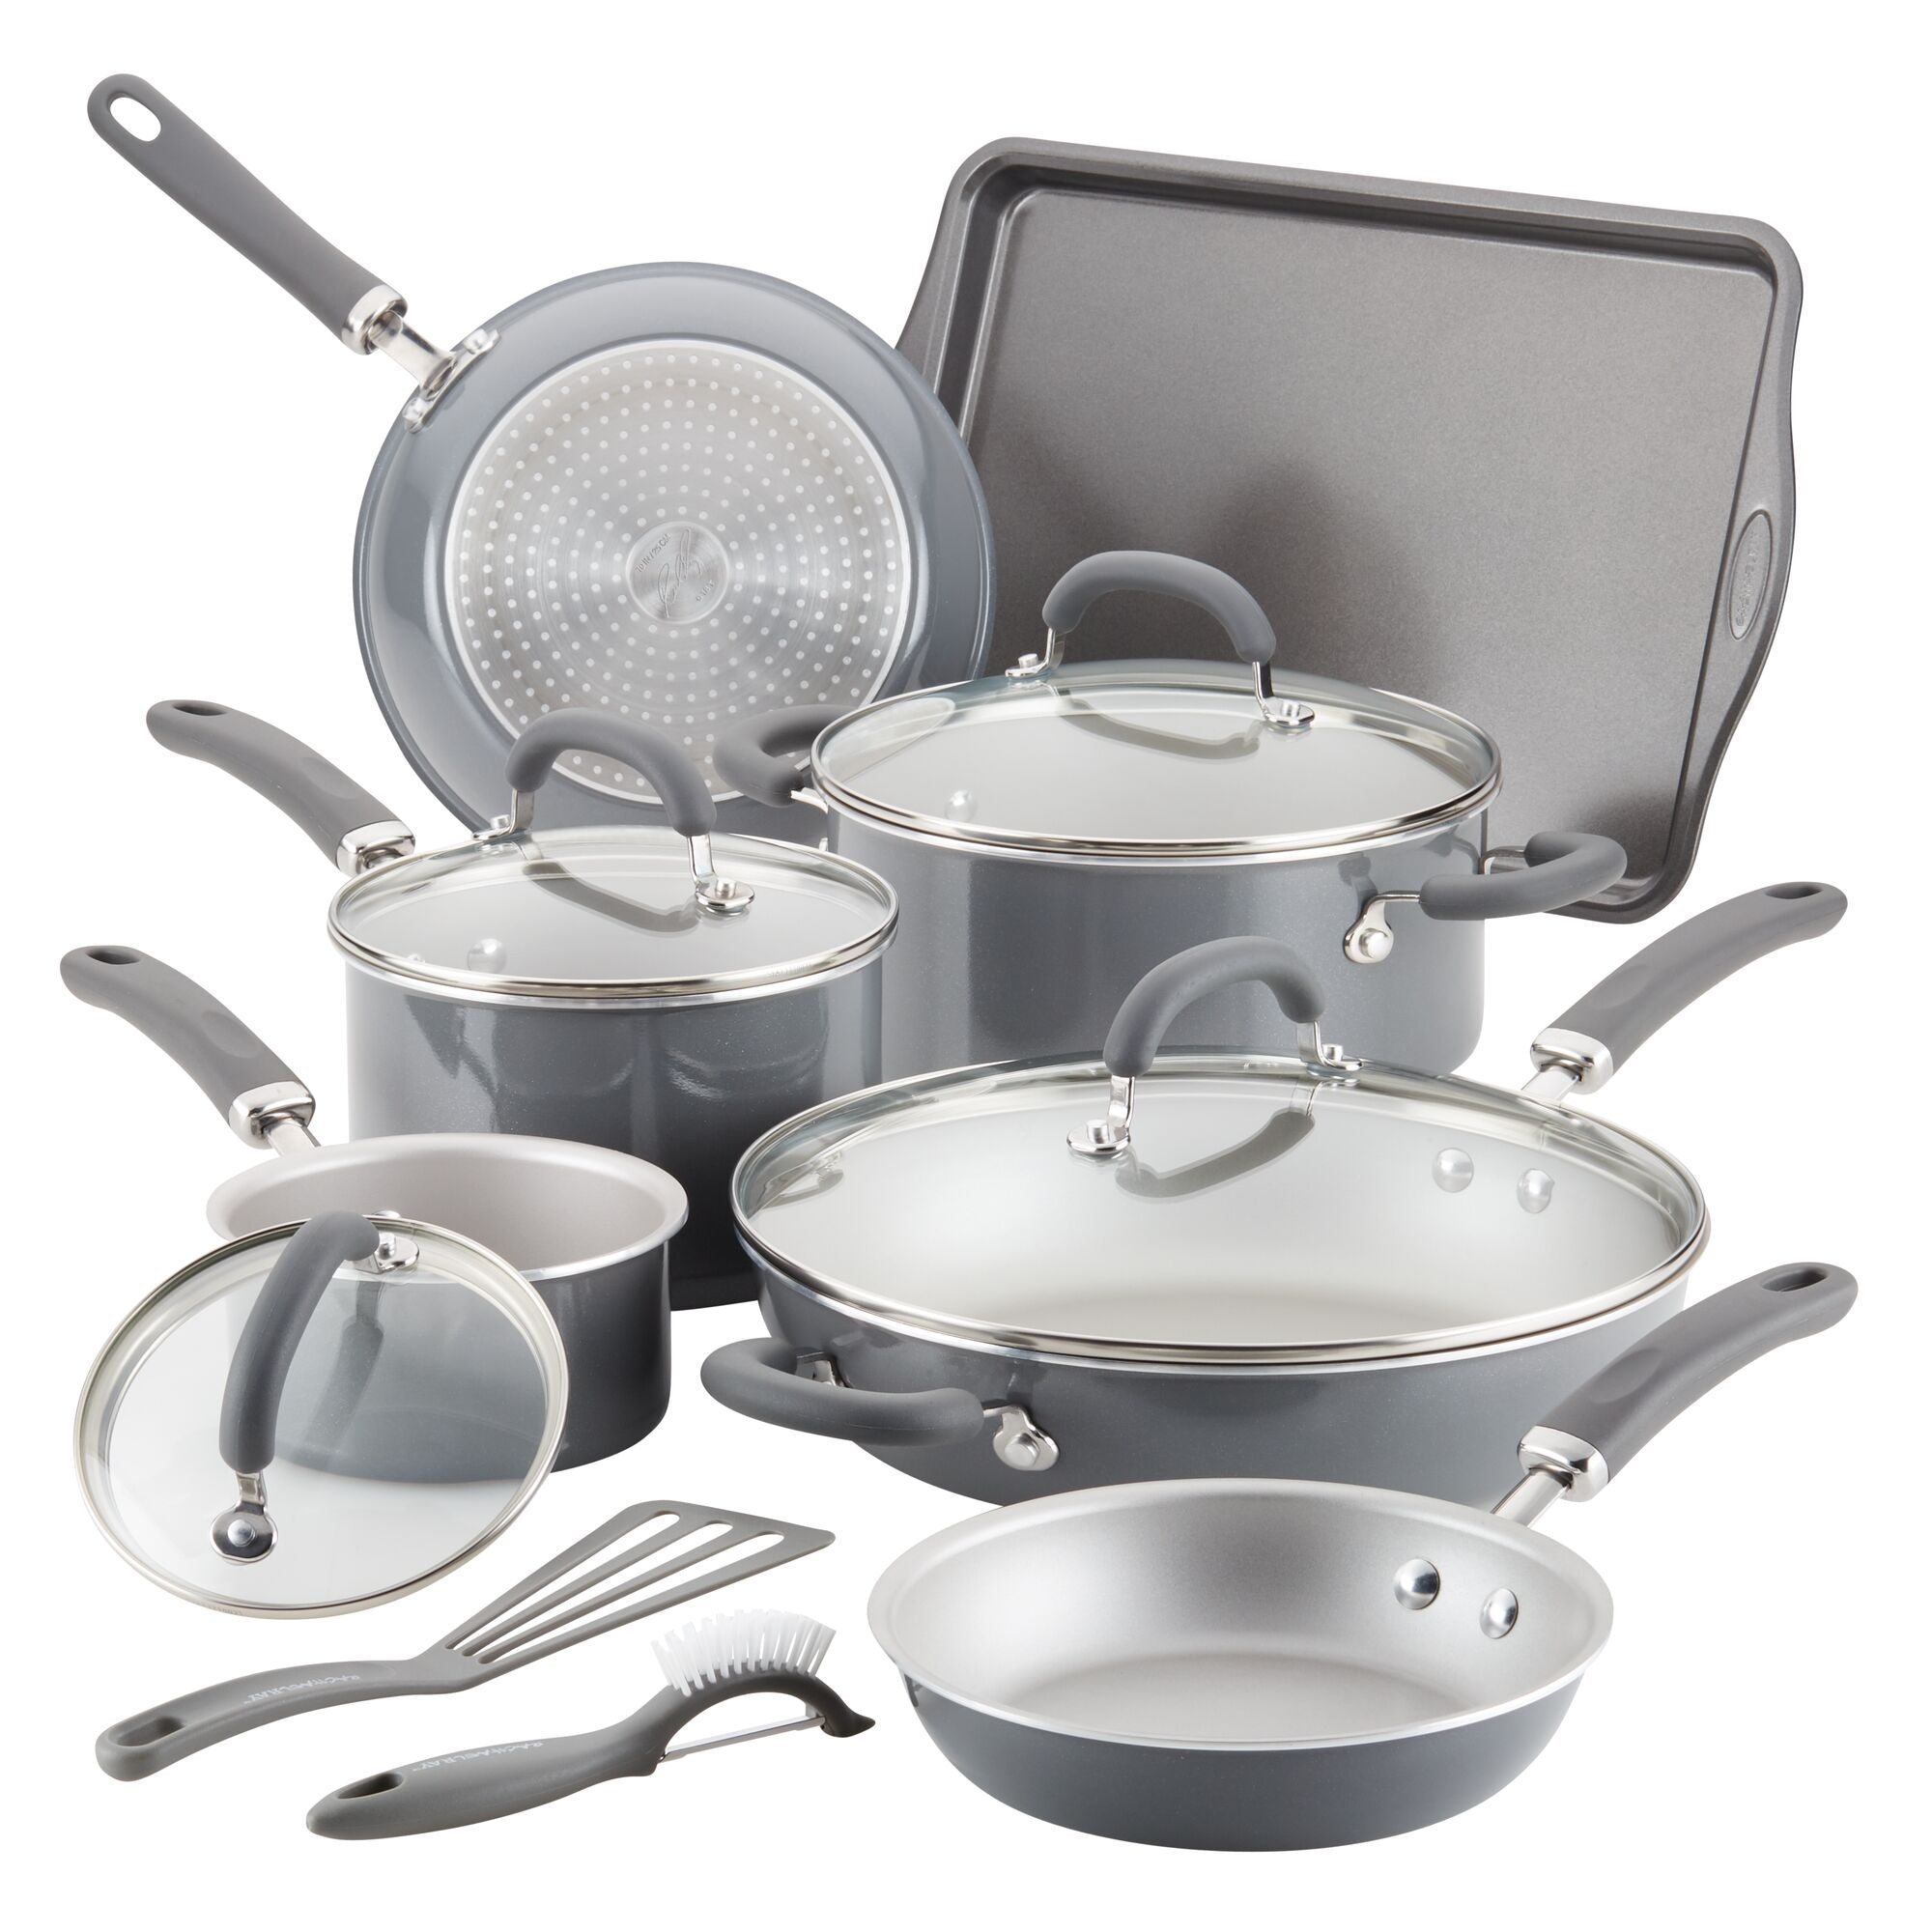 13-Piece Create Delicious Nonstick Induction Cookware Set